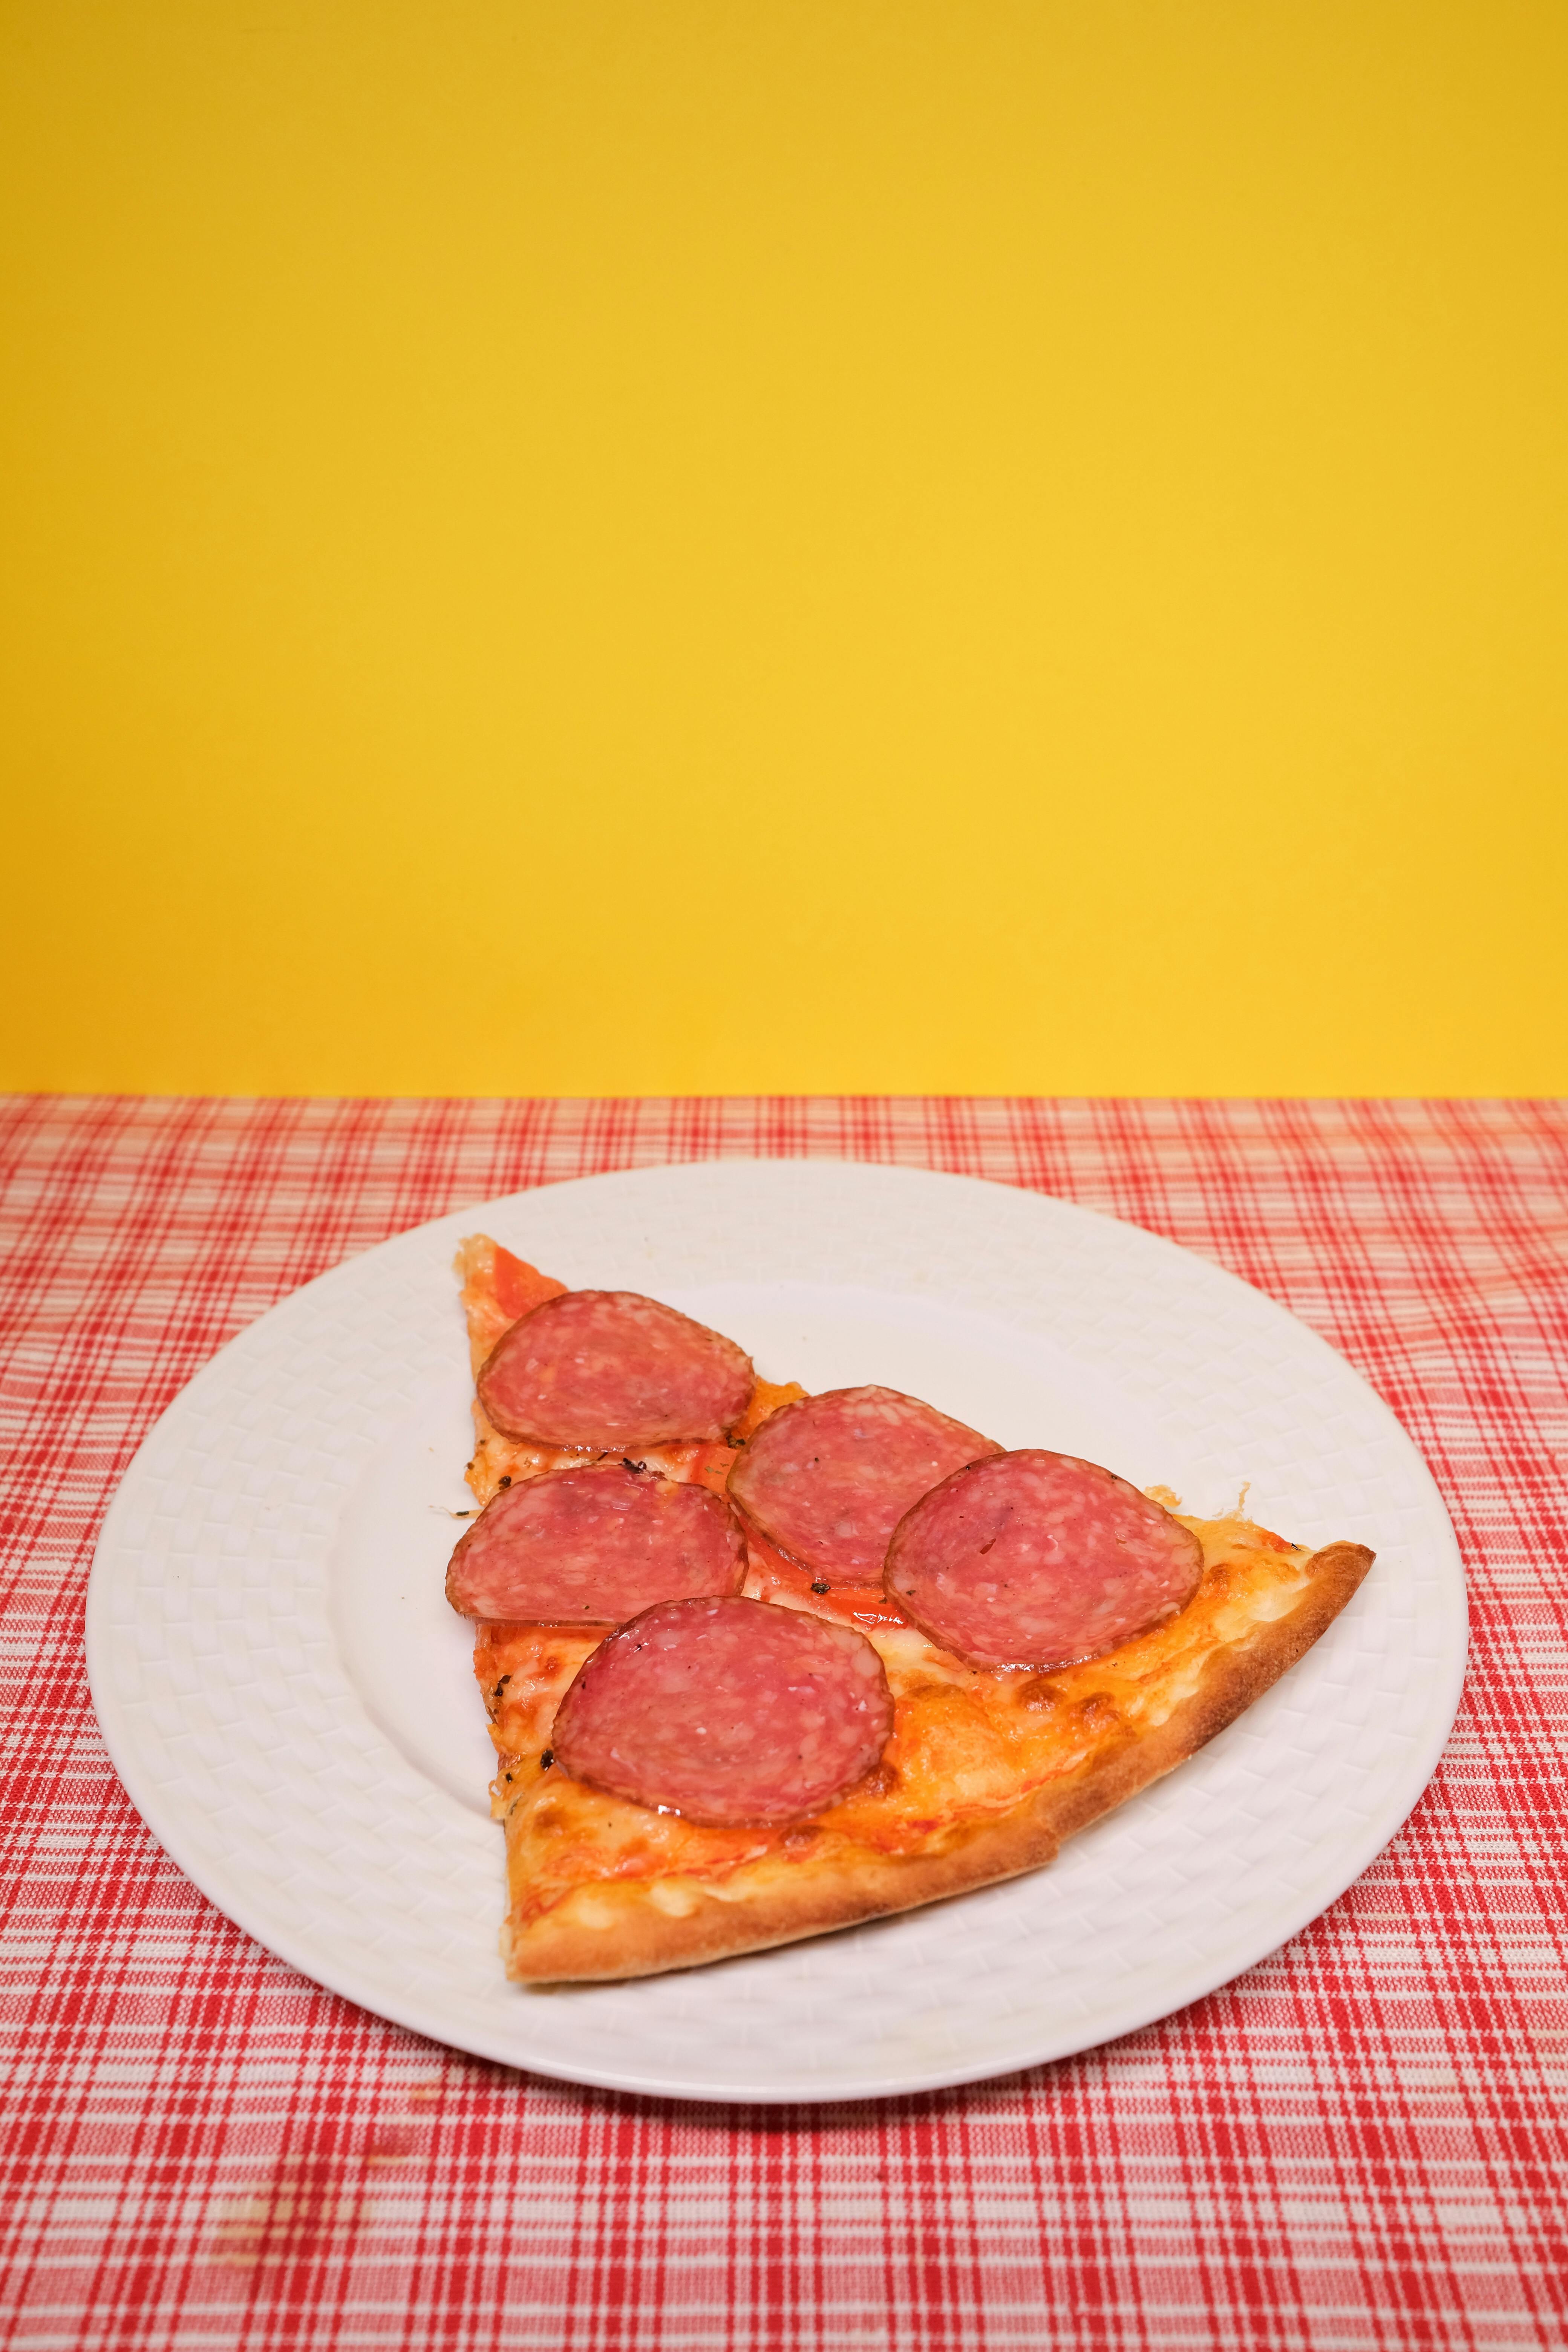 slice of yummy pizza served on table in kitchen